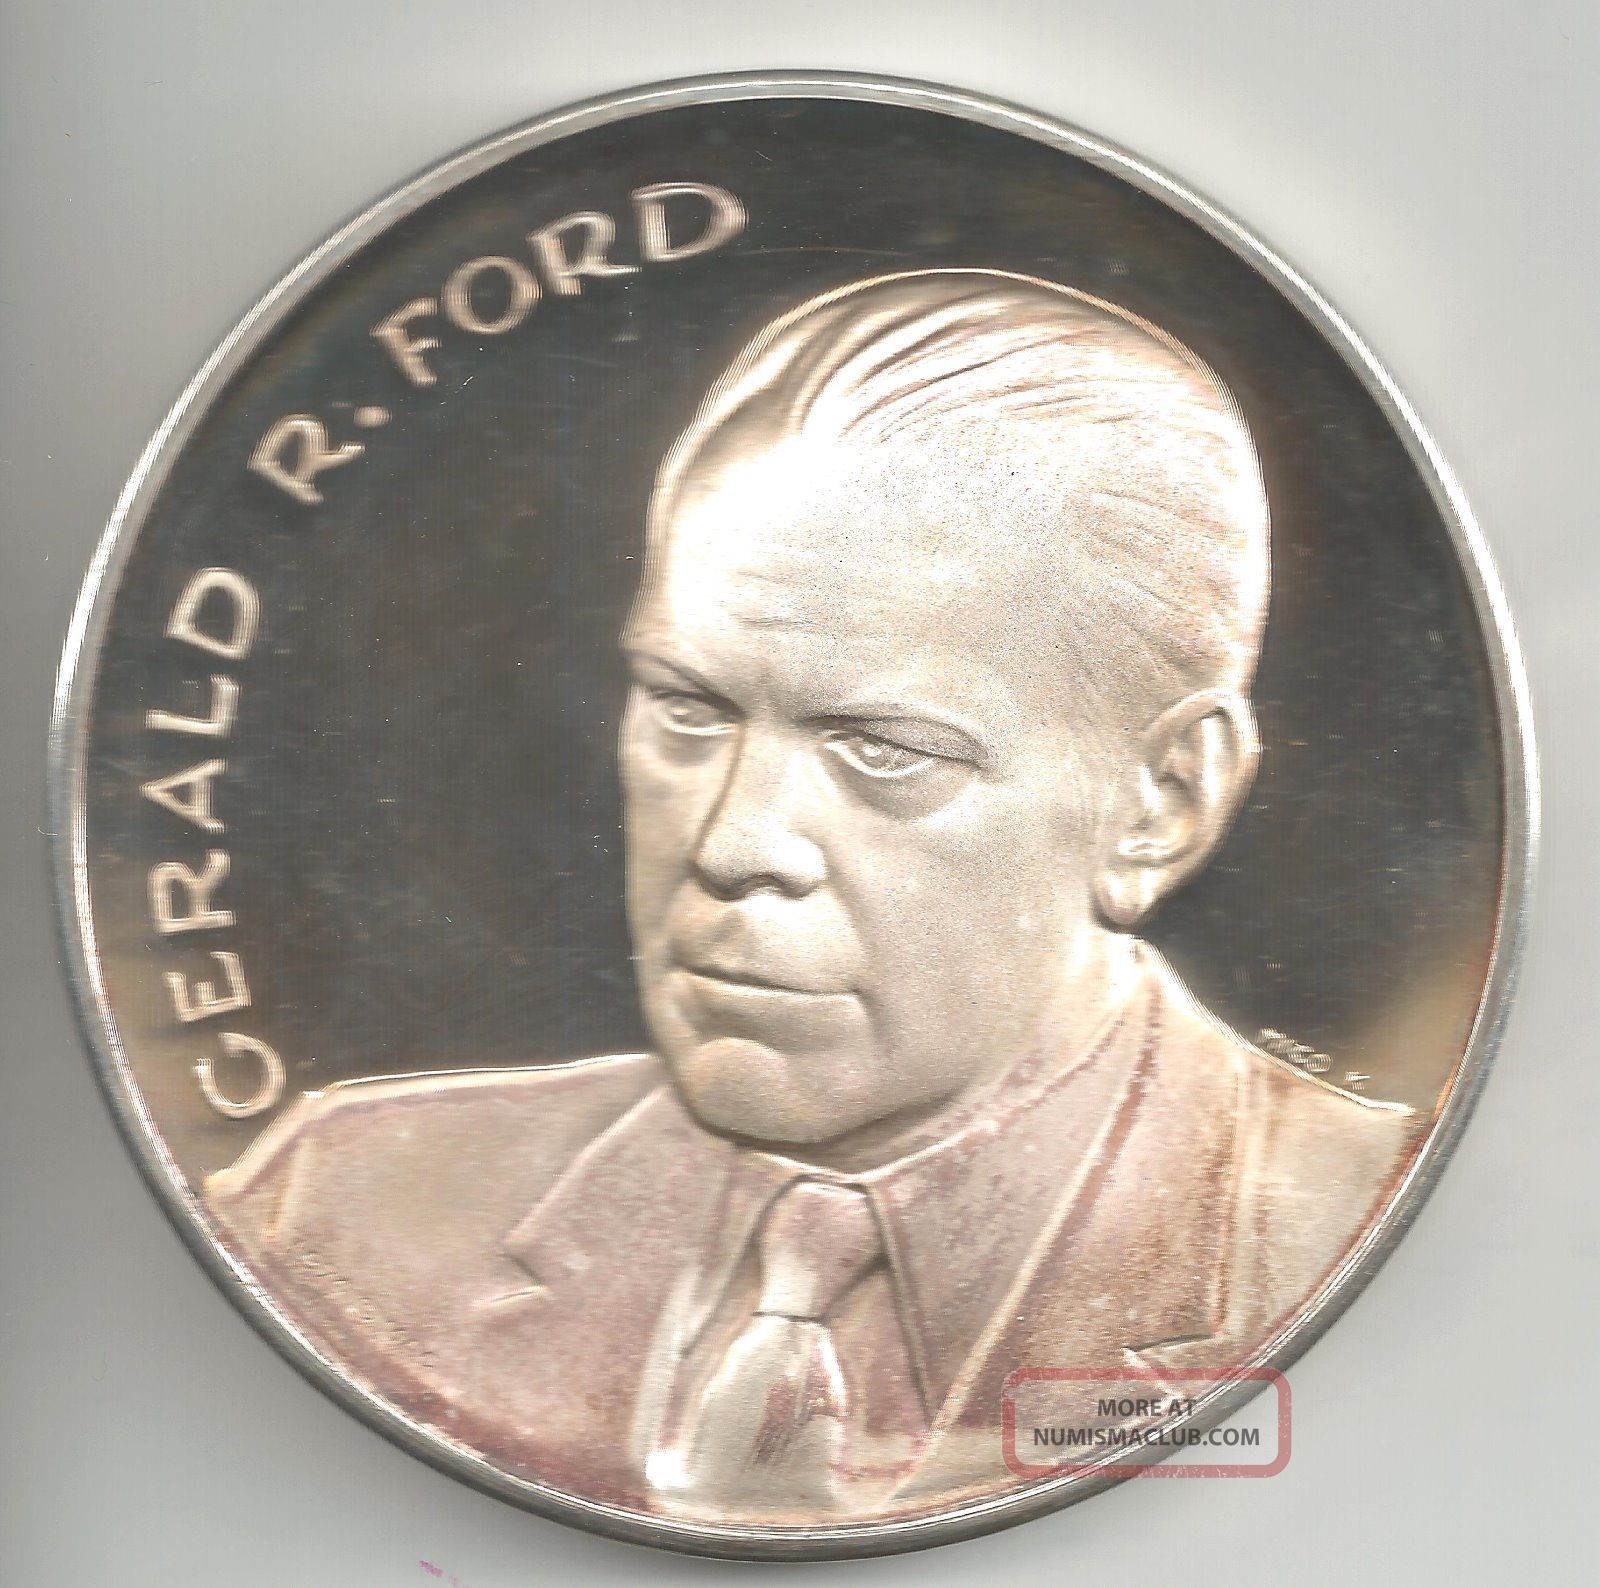 Congressional gold medal gerald ford #5